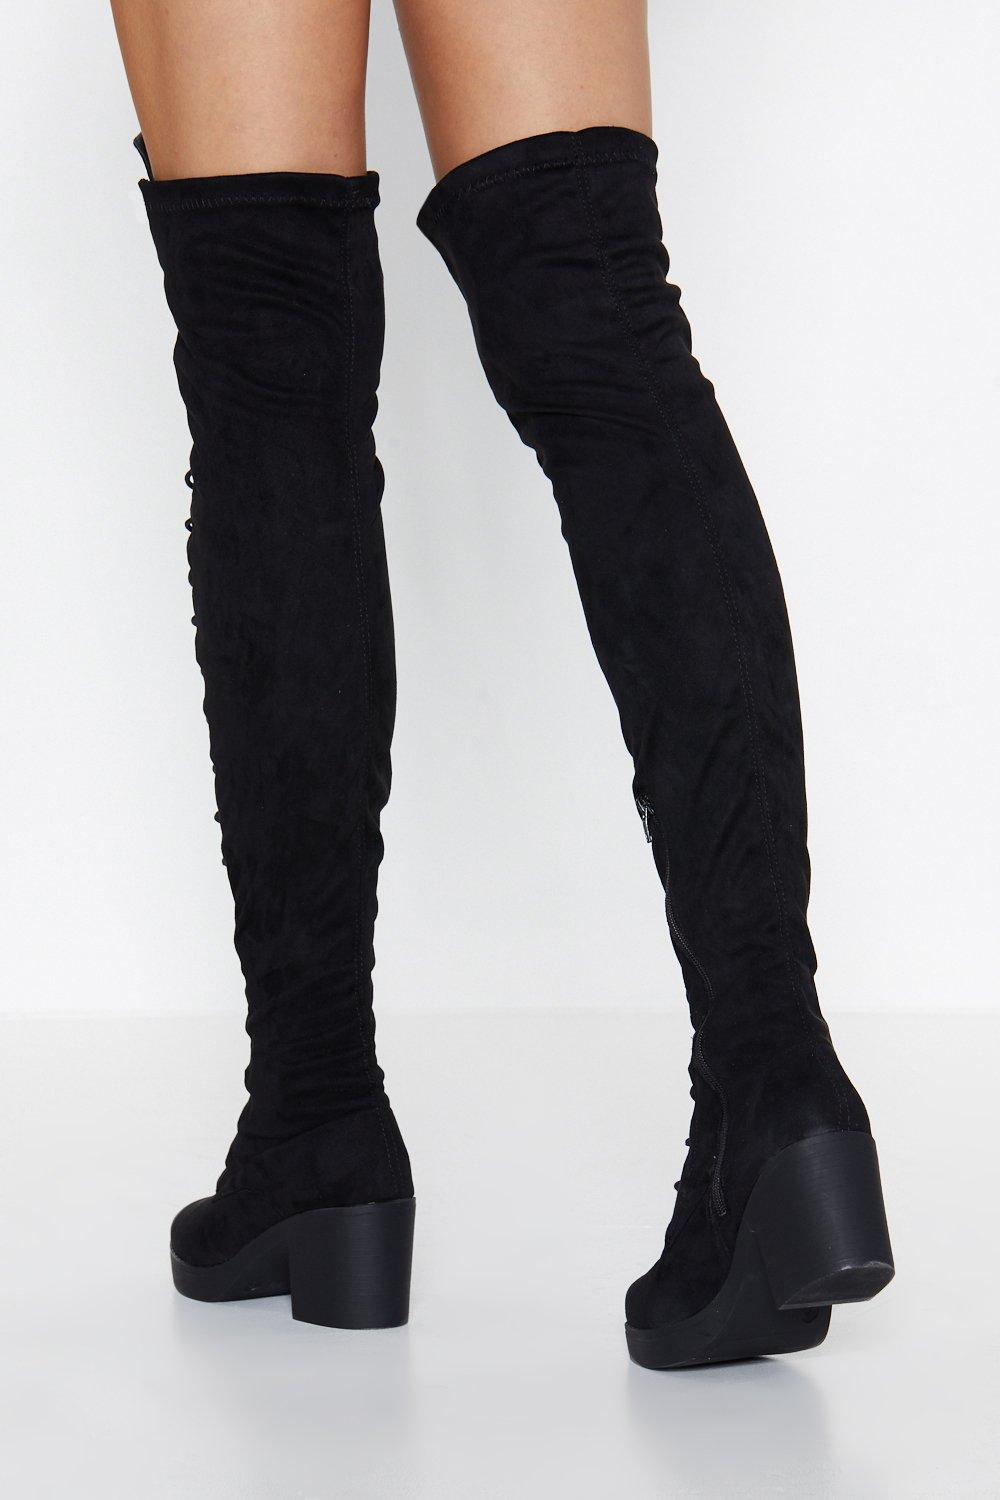 Picasso Bedankt Zwaaien Lace Up Over the Knee Boots | Nasty Gal